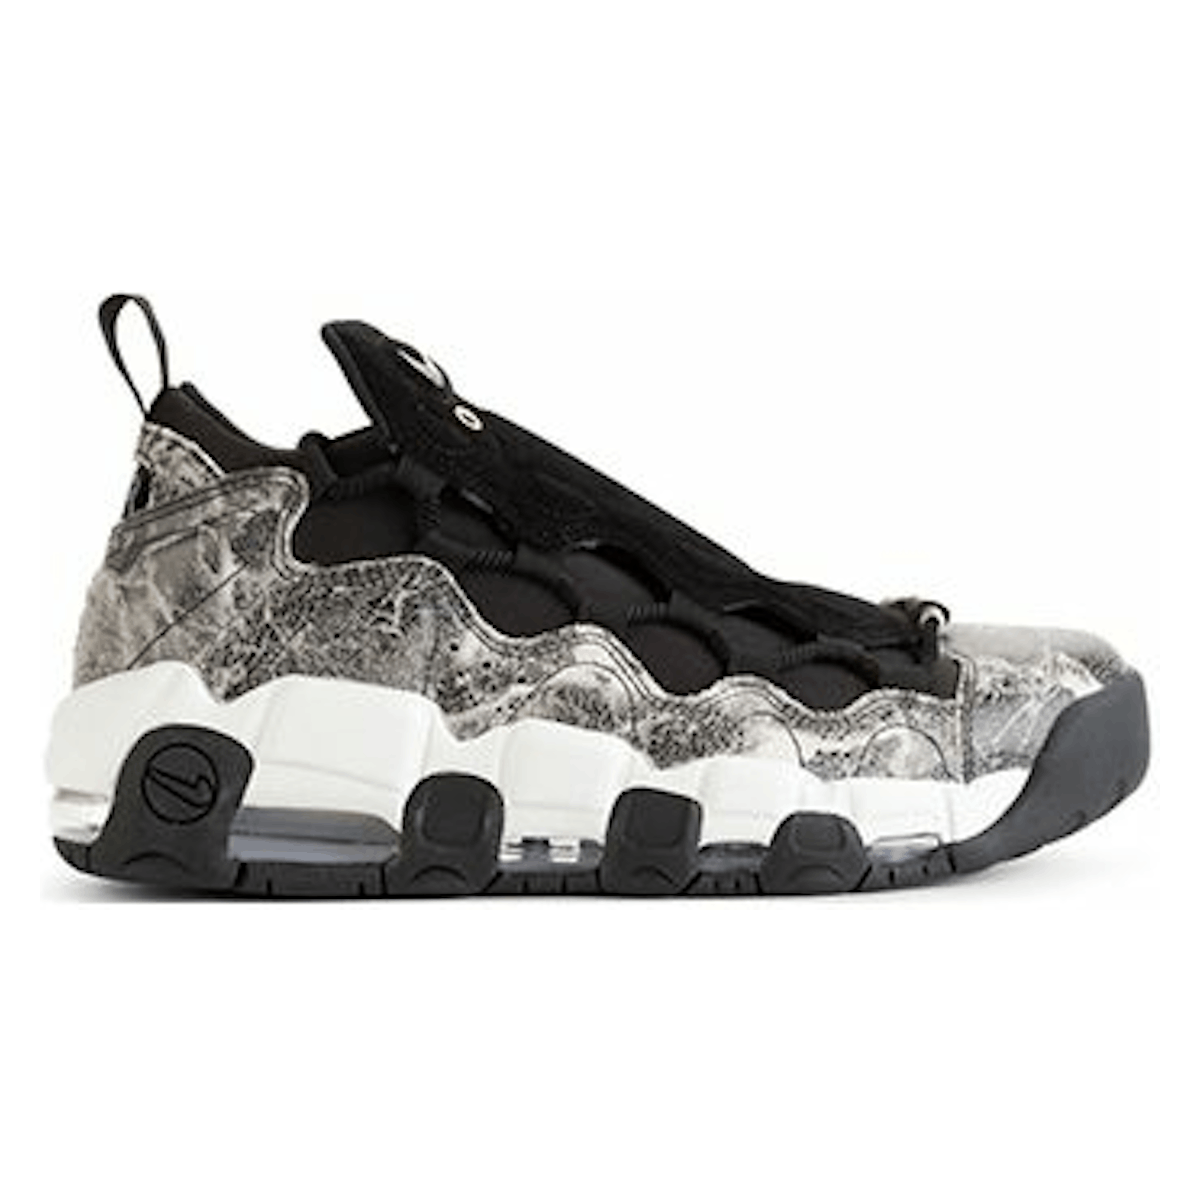 Nike Air More Money LX "Marble Luxe"